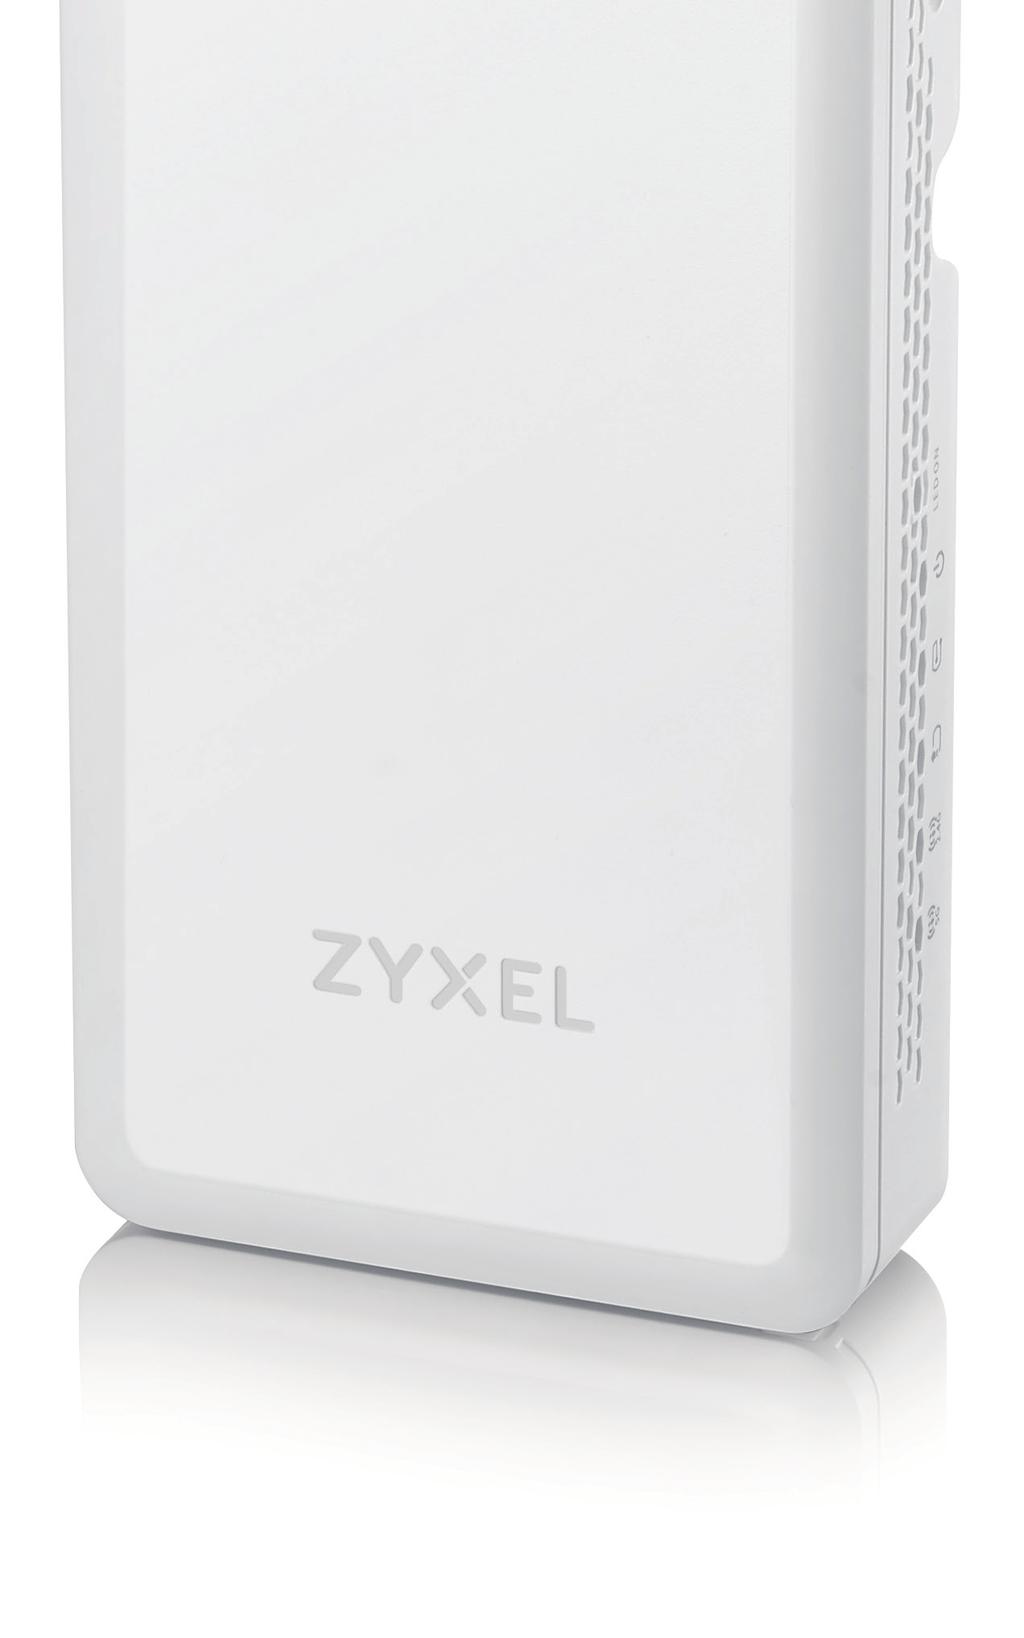 11ac Wall-Plate Unified Access Point is an adaptive Wi-Fi and Switch for hotels.